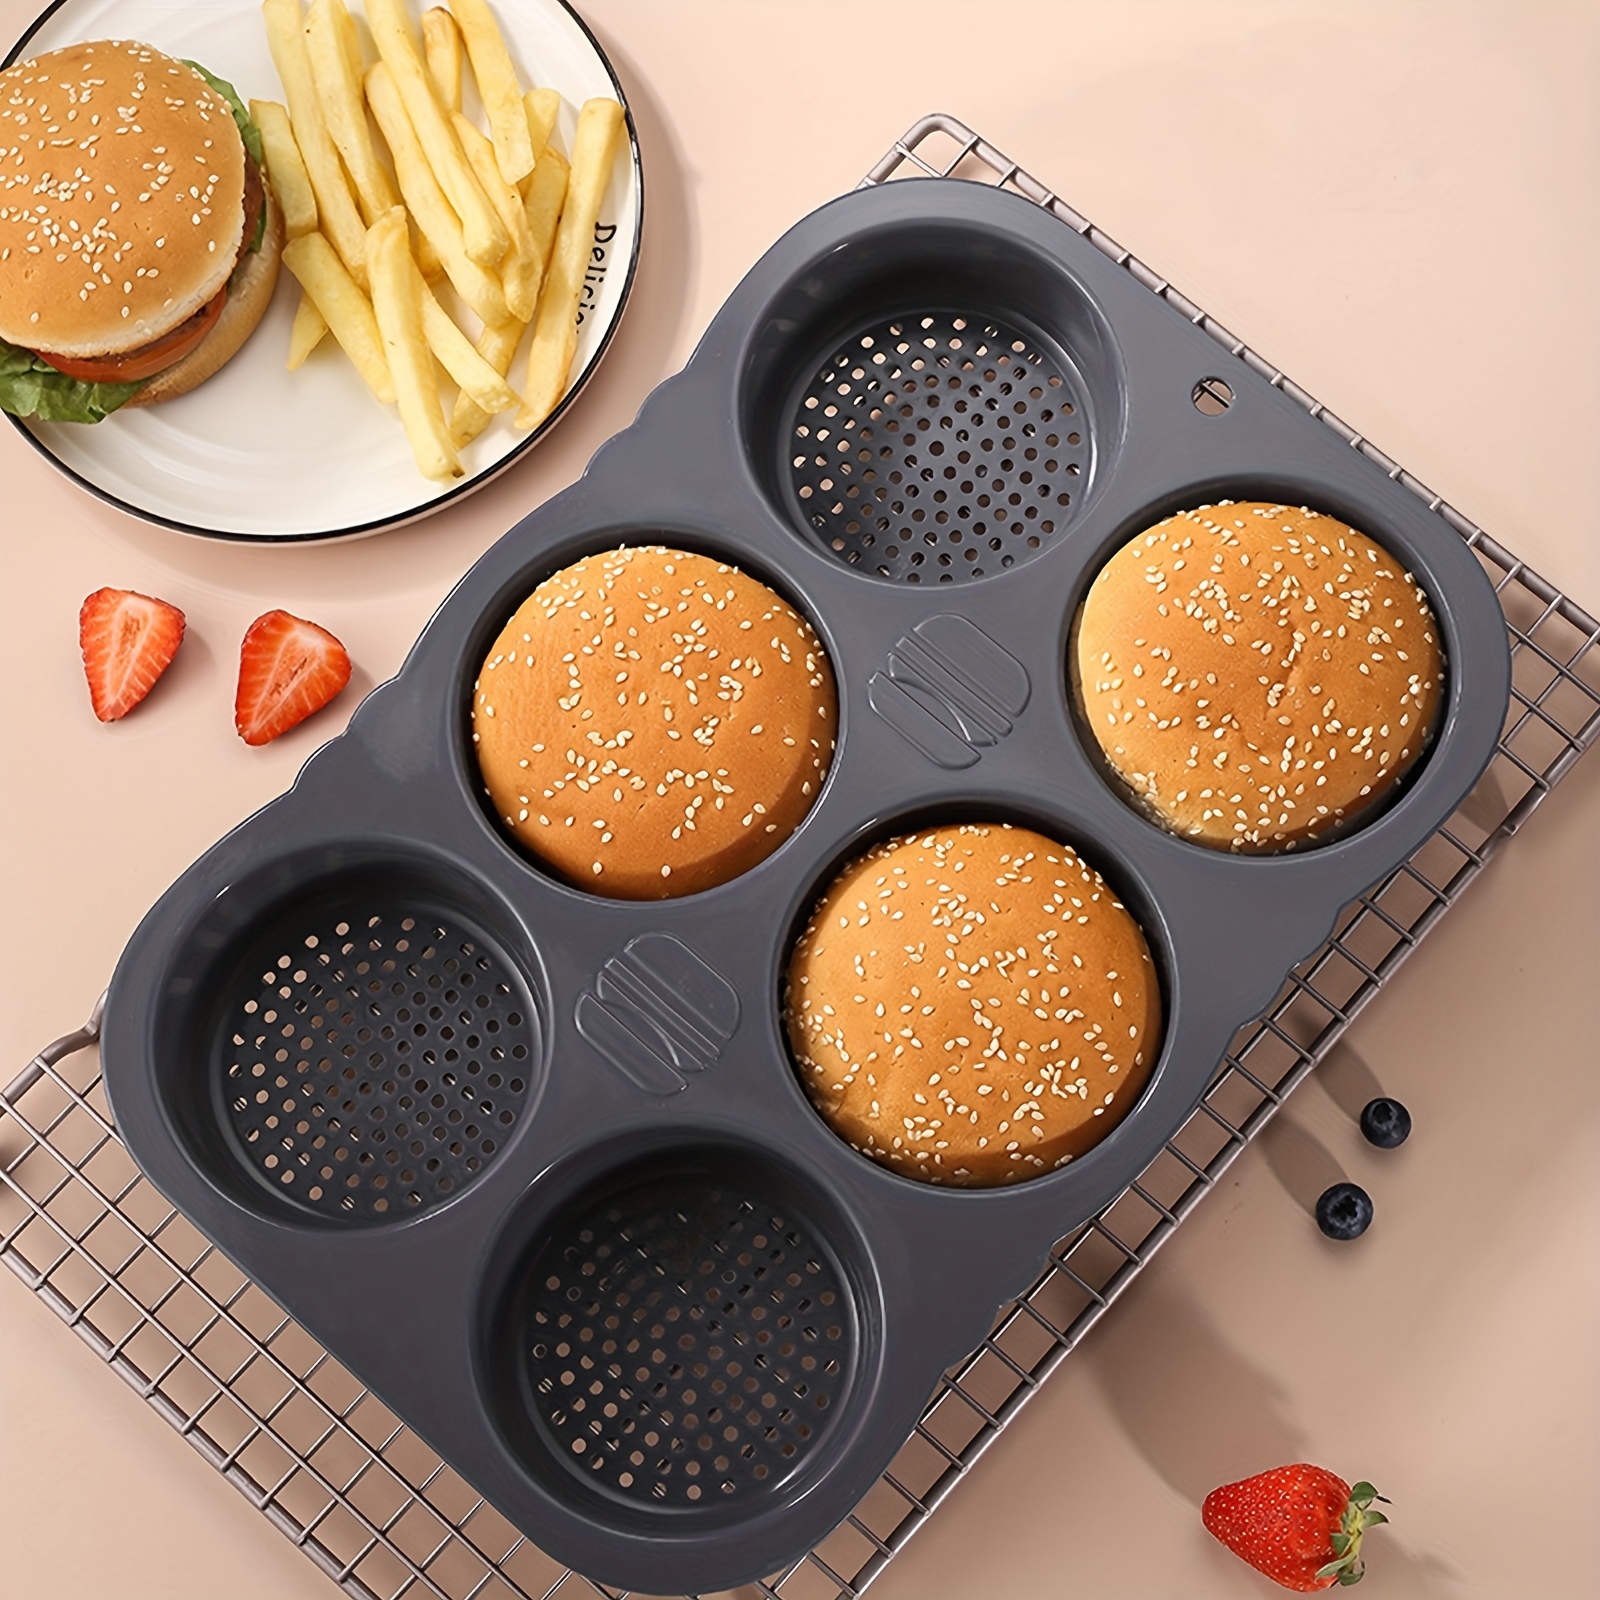 1 Pc silicone bread mold Pan Burger Mold Bread Loaf Pan Toast Pan